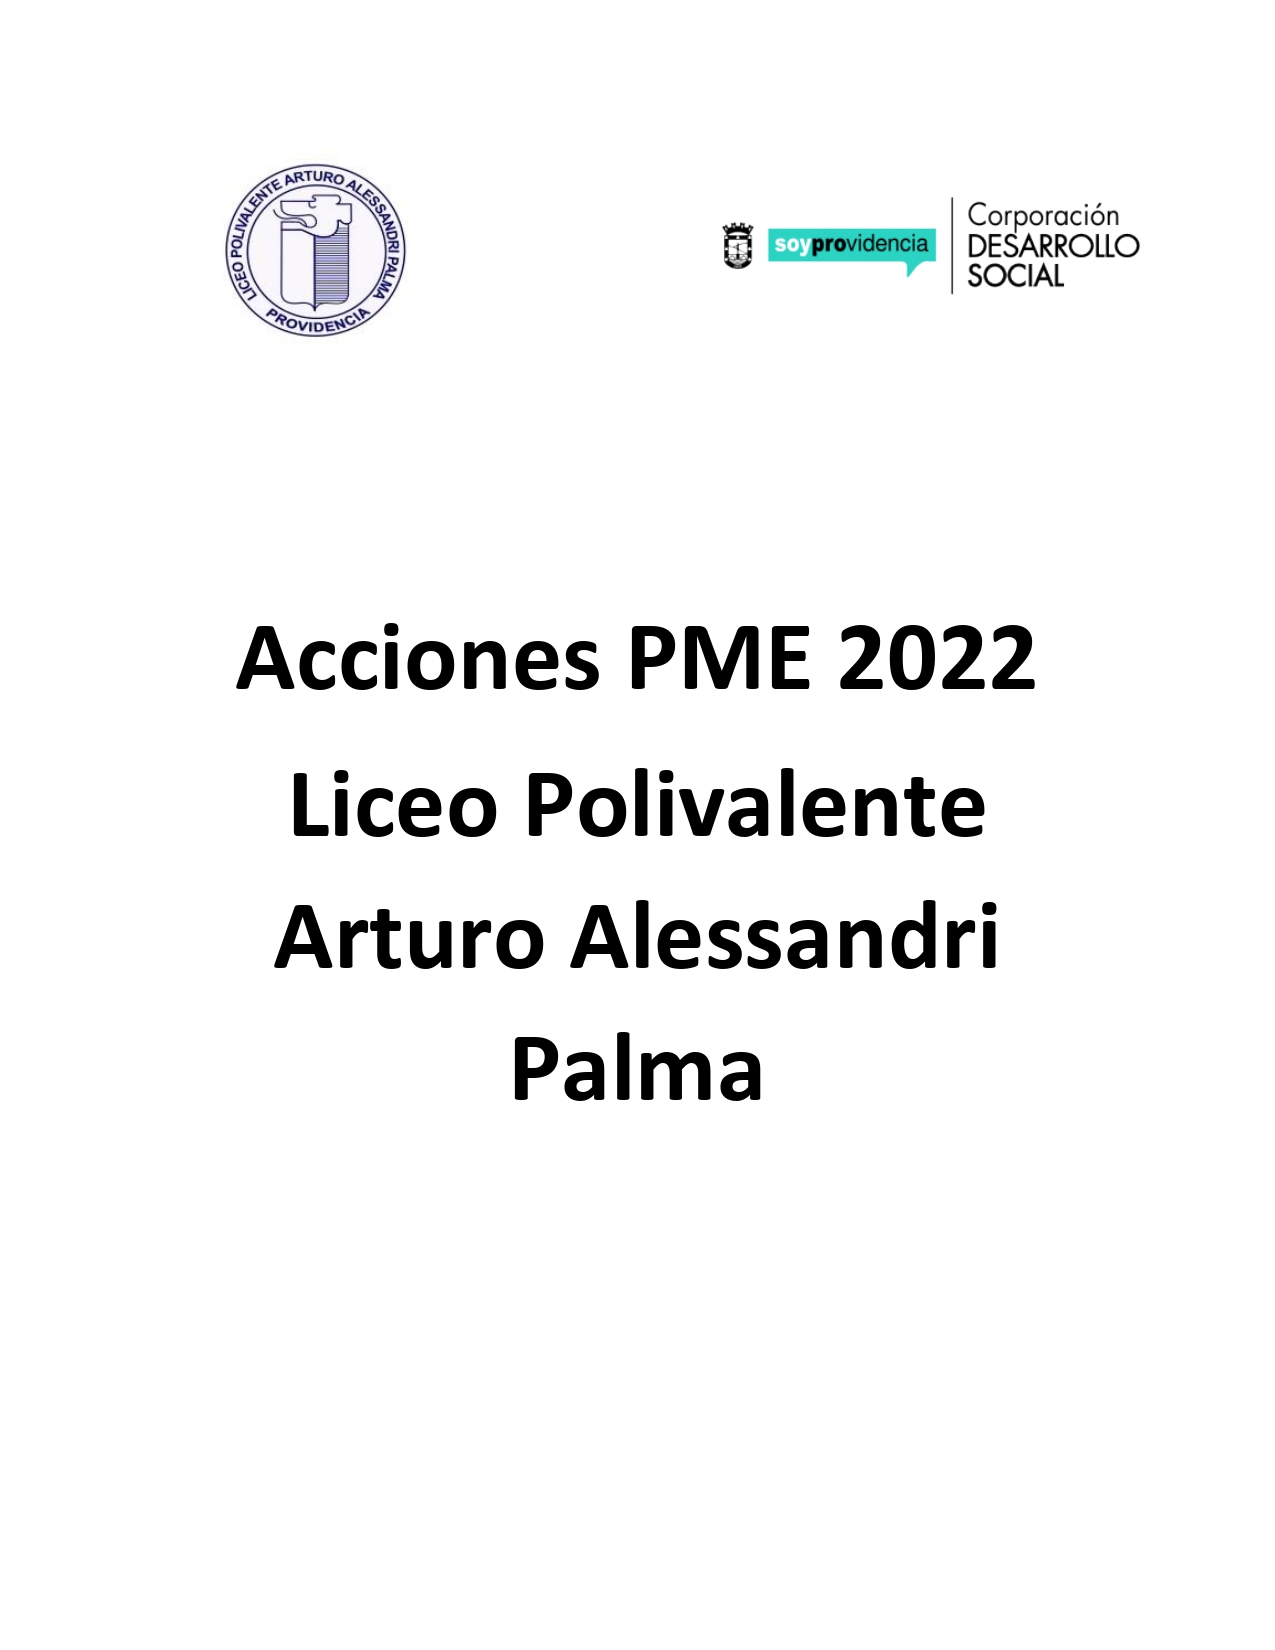 Acciones PME 2022 pages to jpg 0001